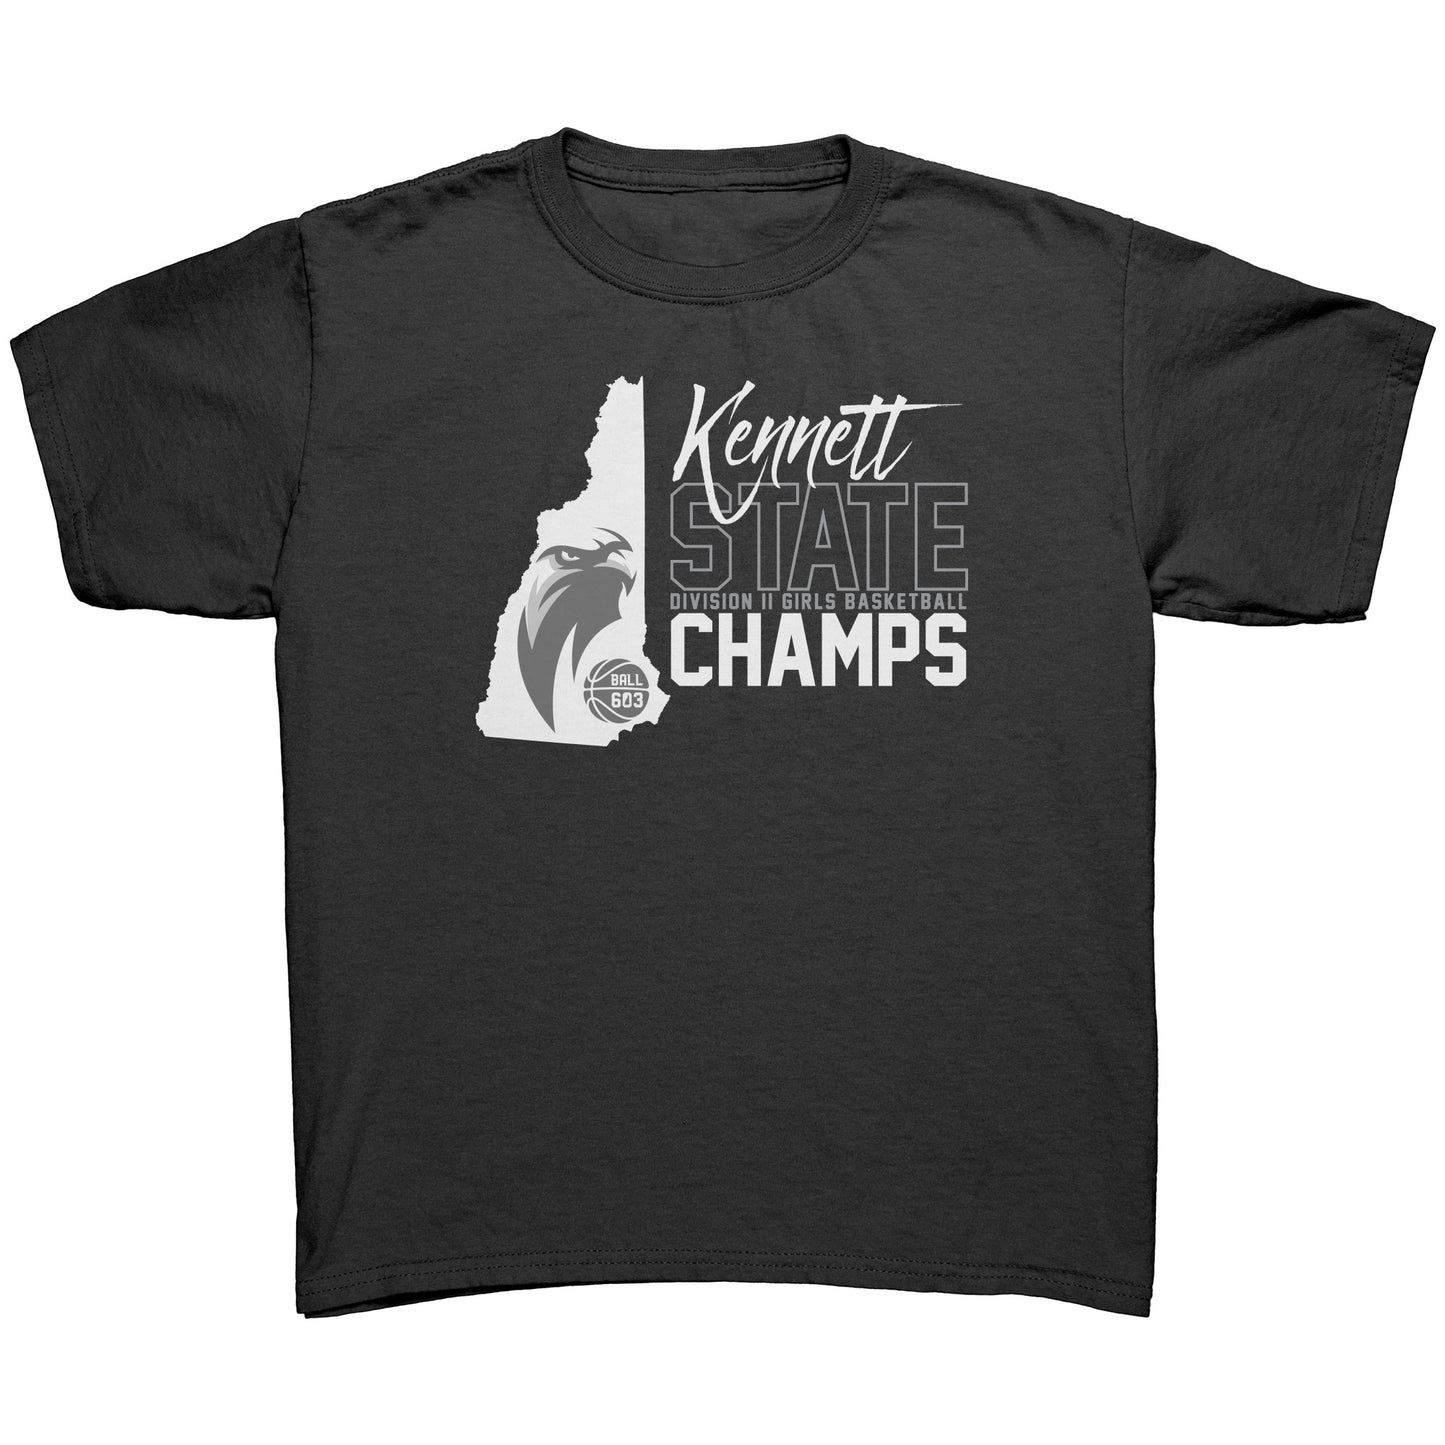 Kennett State Champs: Youth T-Shirt